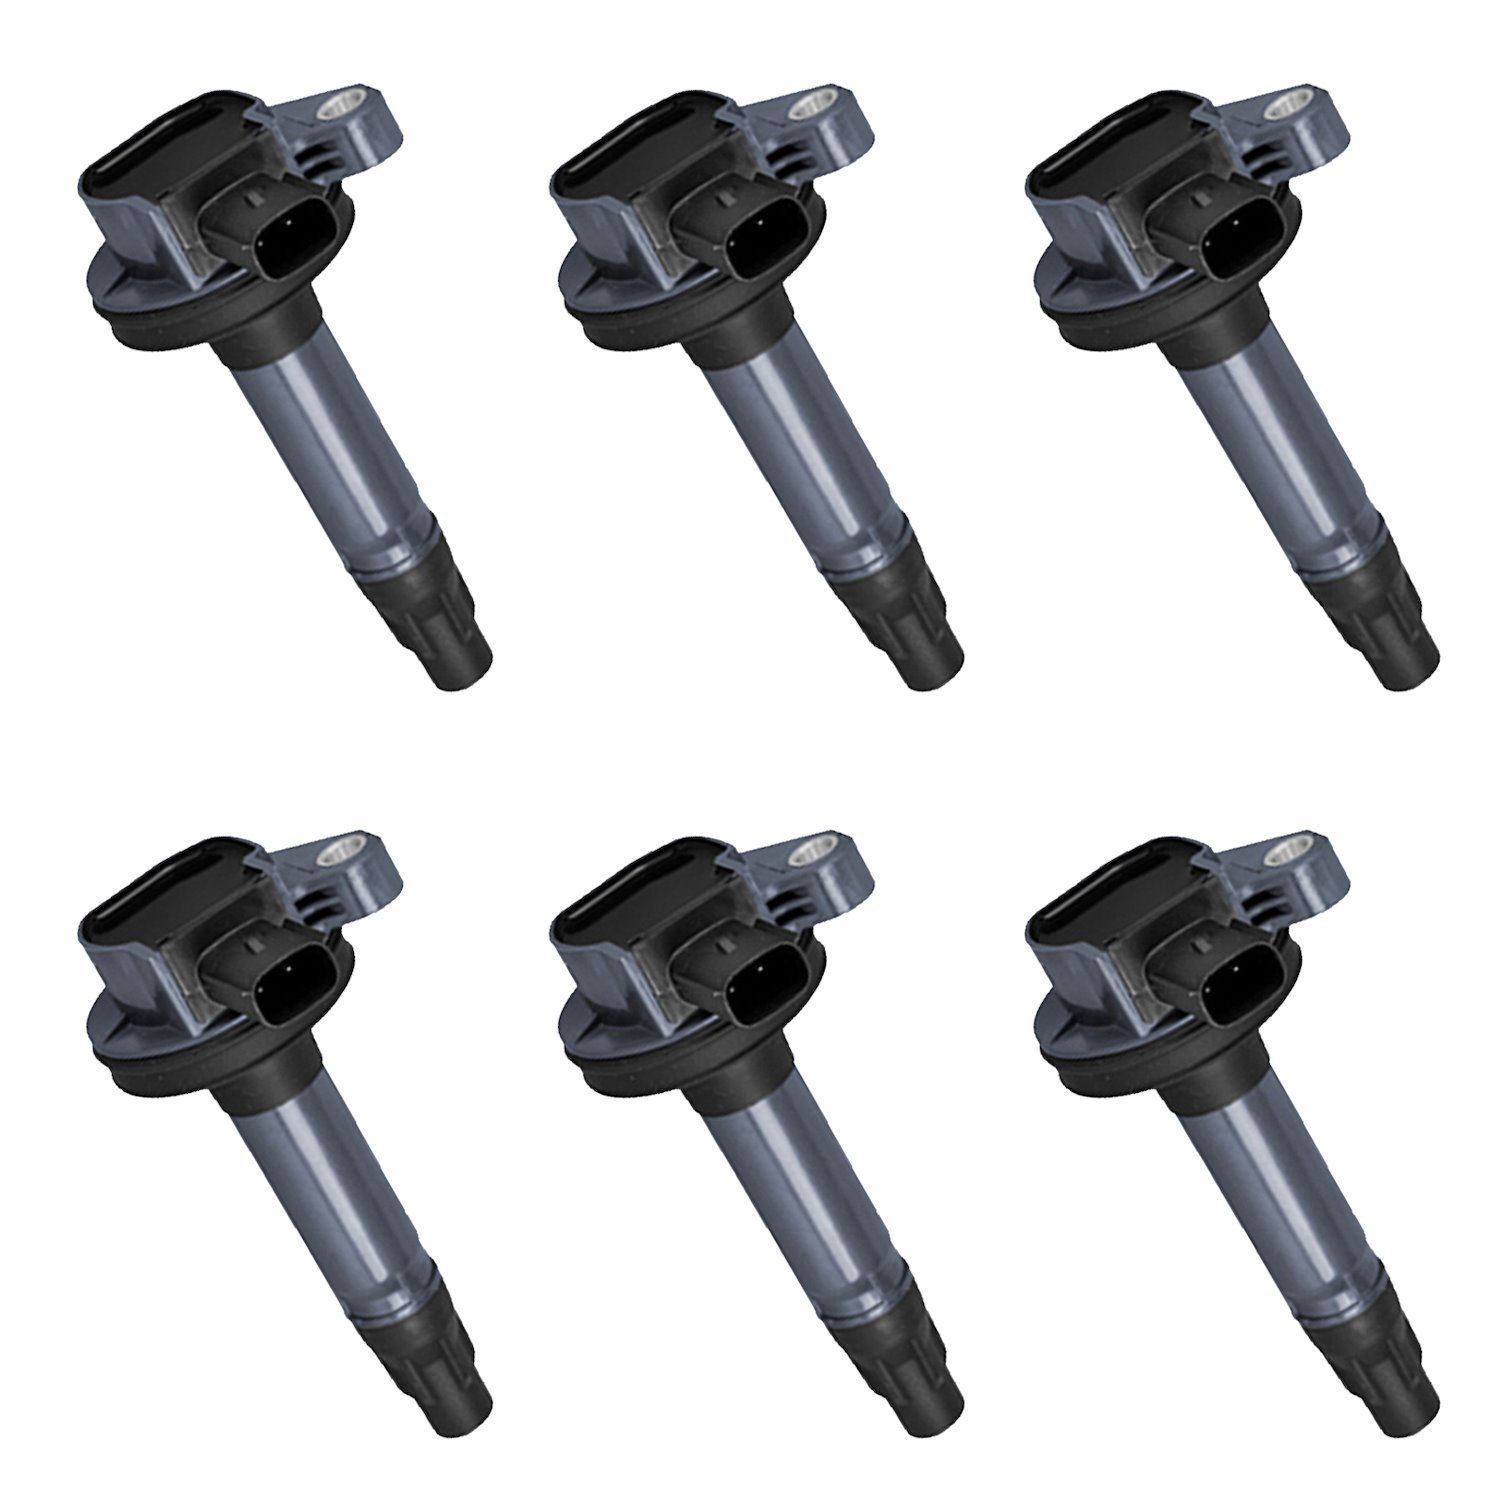 OE Replacement Ignition Coils for Lincoln/Mazda 3.7L/3.5L V6